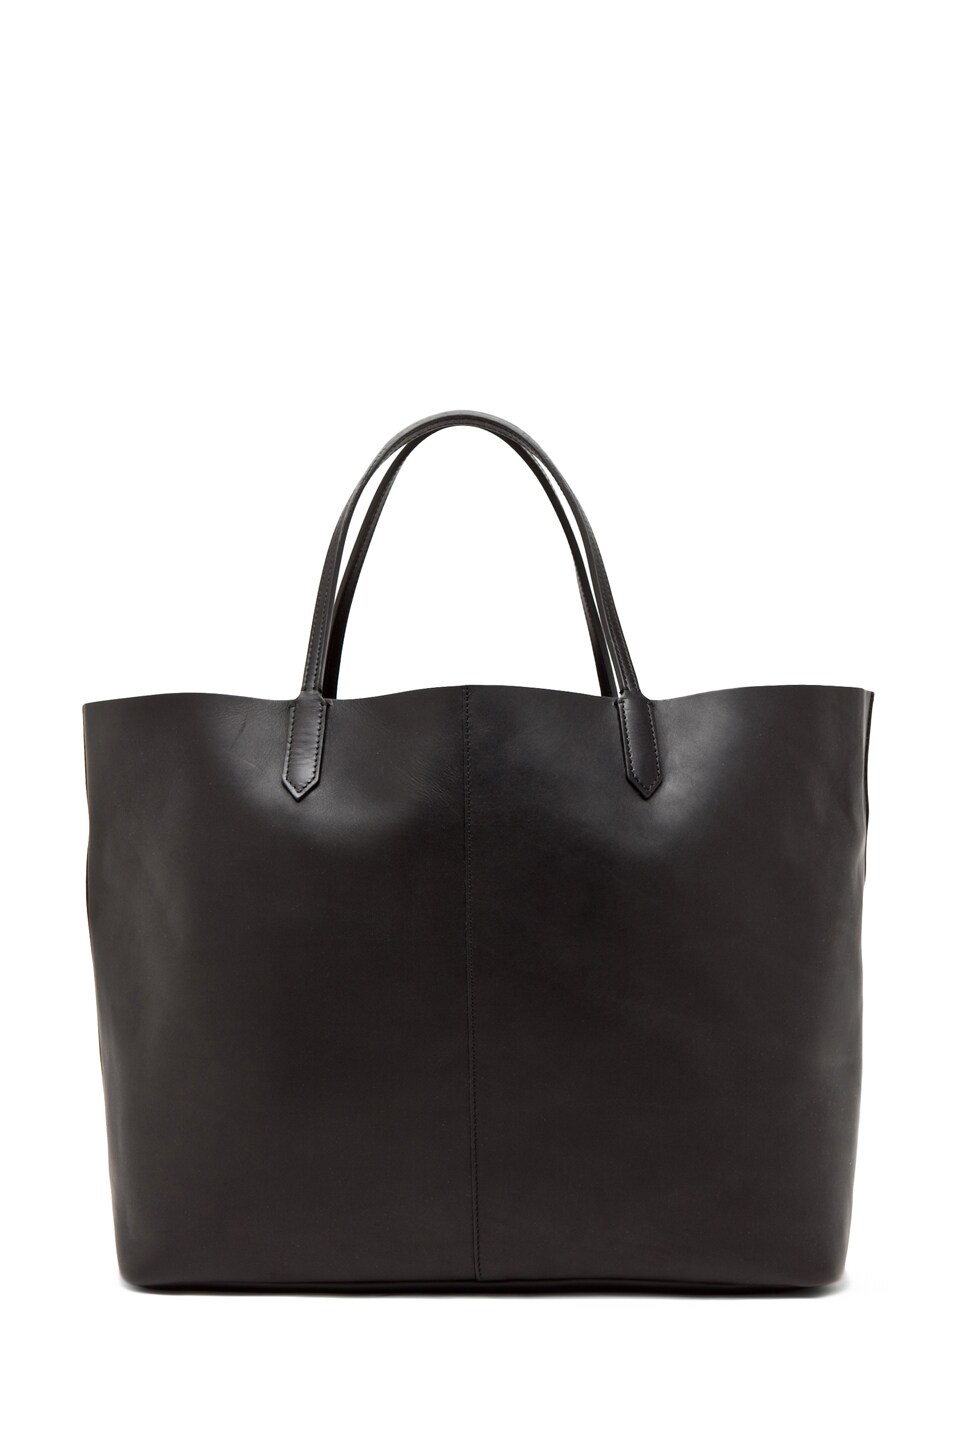 Givenchy Shopper with Pouch in Black | FWRD